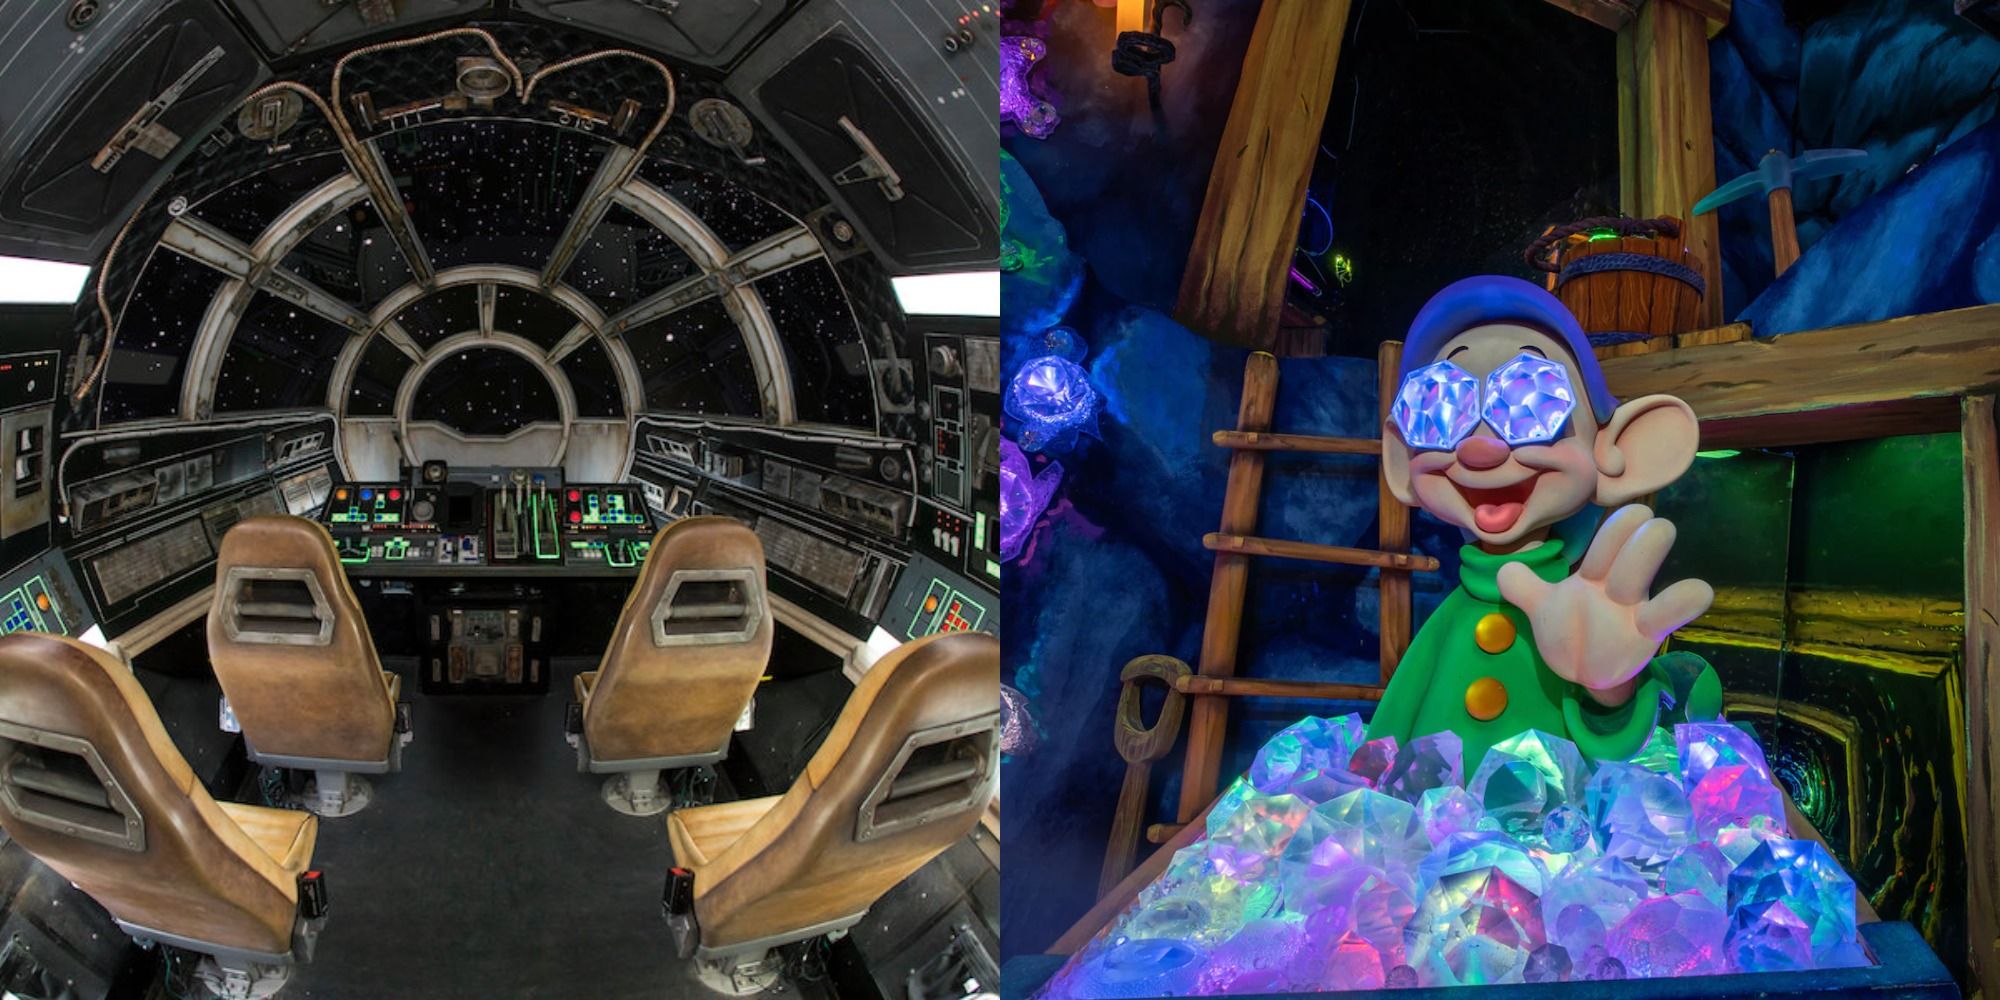 Split image showing the Millennium Falcon: Smuggler's Run and Snow White's Enchanted Wish rides